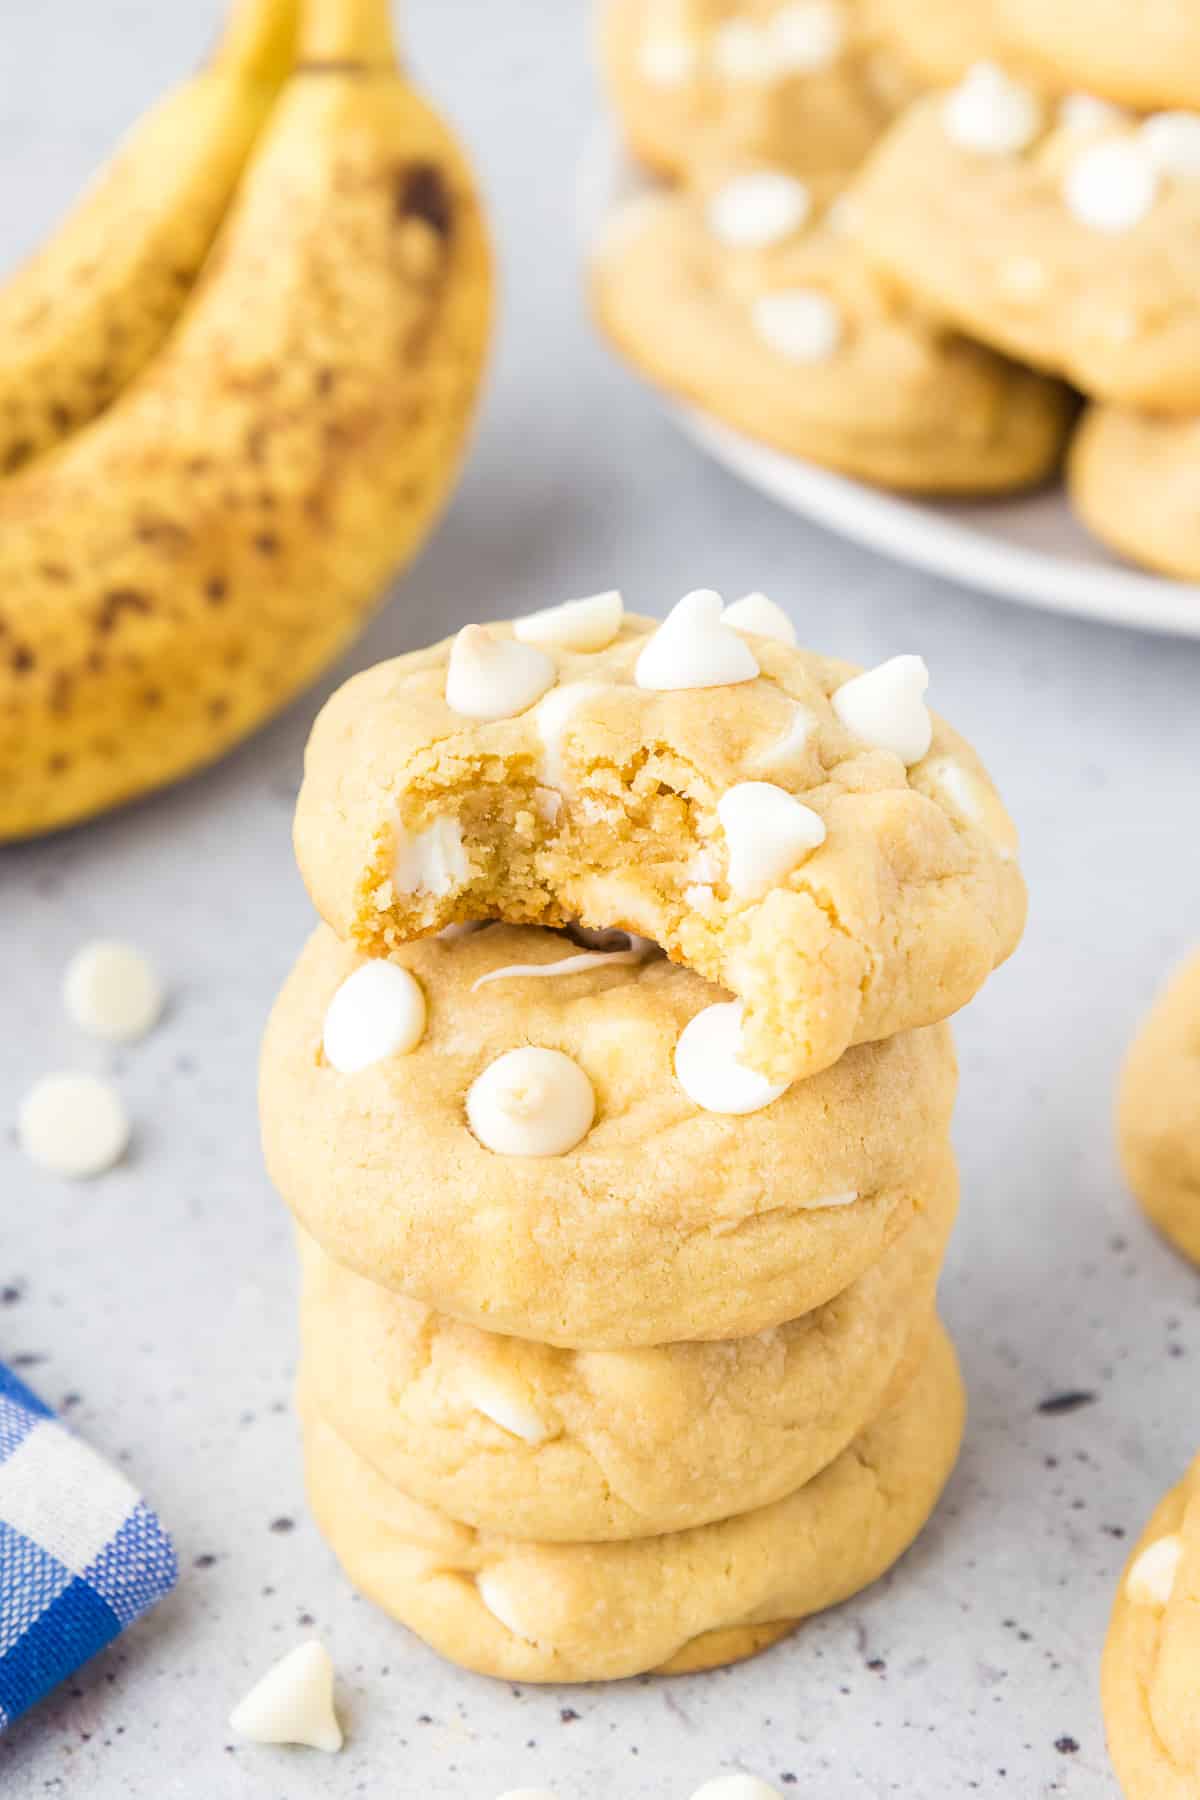 Stacked banana pudding cookies from the side topped with white chocolate chips with a bite missing from the top cookie.